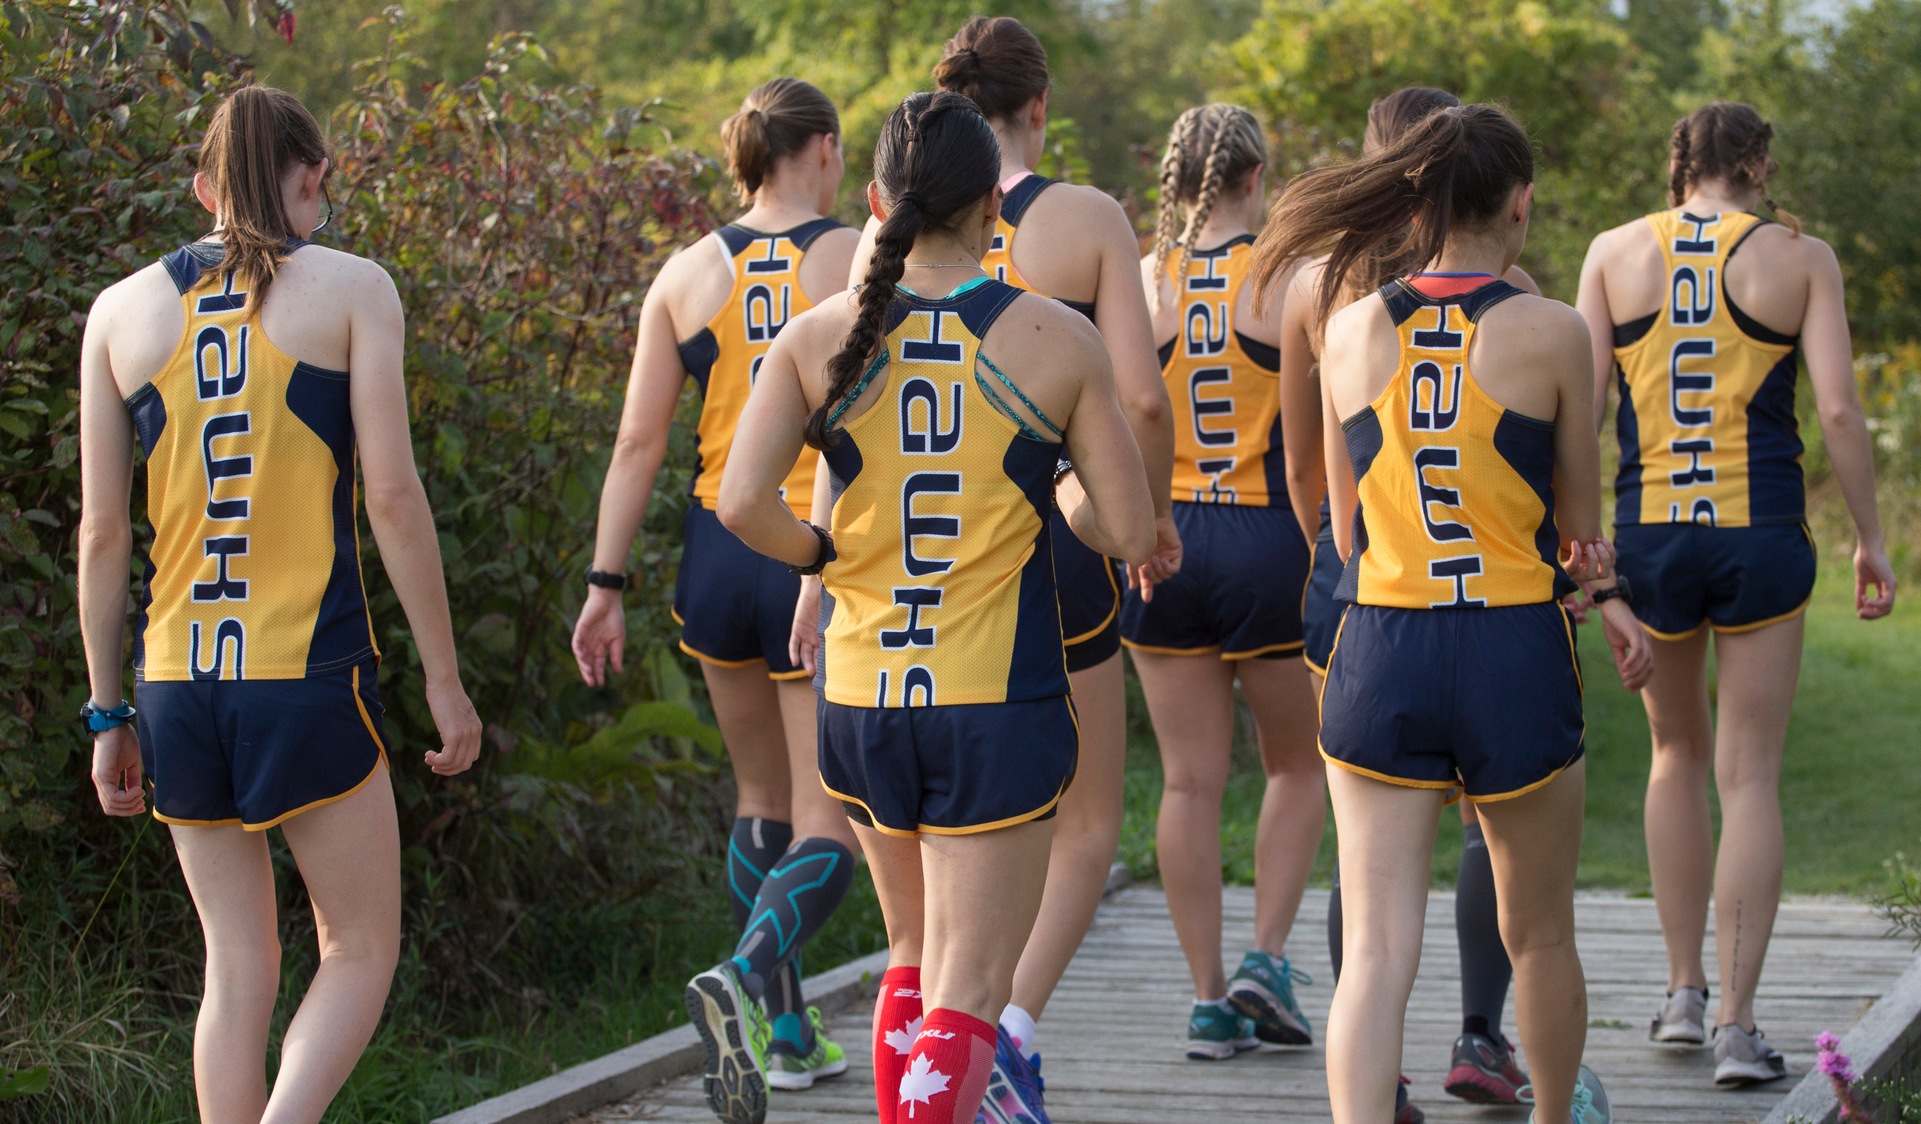 CROSS COUNTRY TEAMS TO FACE TOUGH TEST AT WESTERN U INVITATIONAL